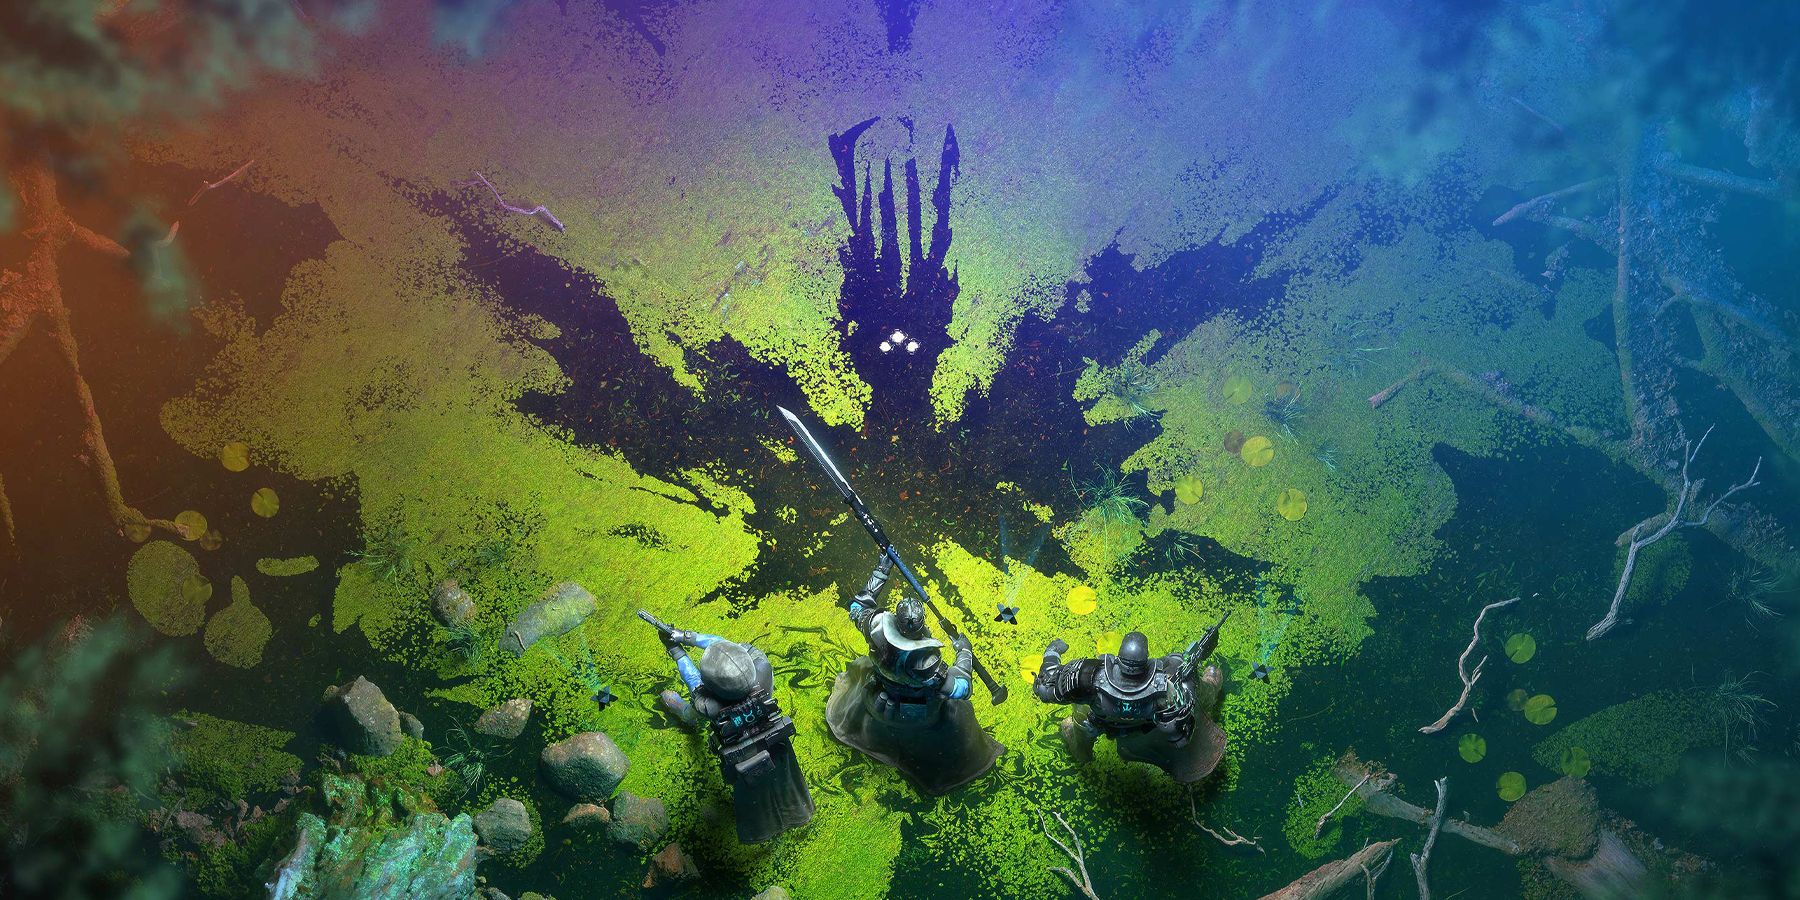 Art for Destiny 2: The Witch Queen depicting a fireteam of Guardians in the swamp of Savathun's throne world.